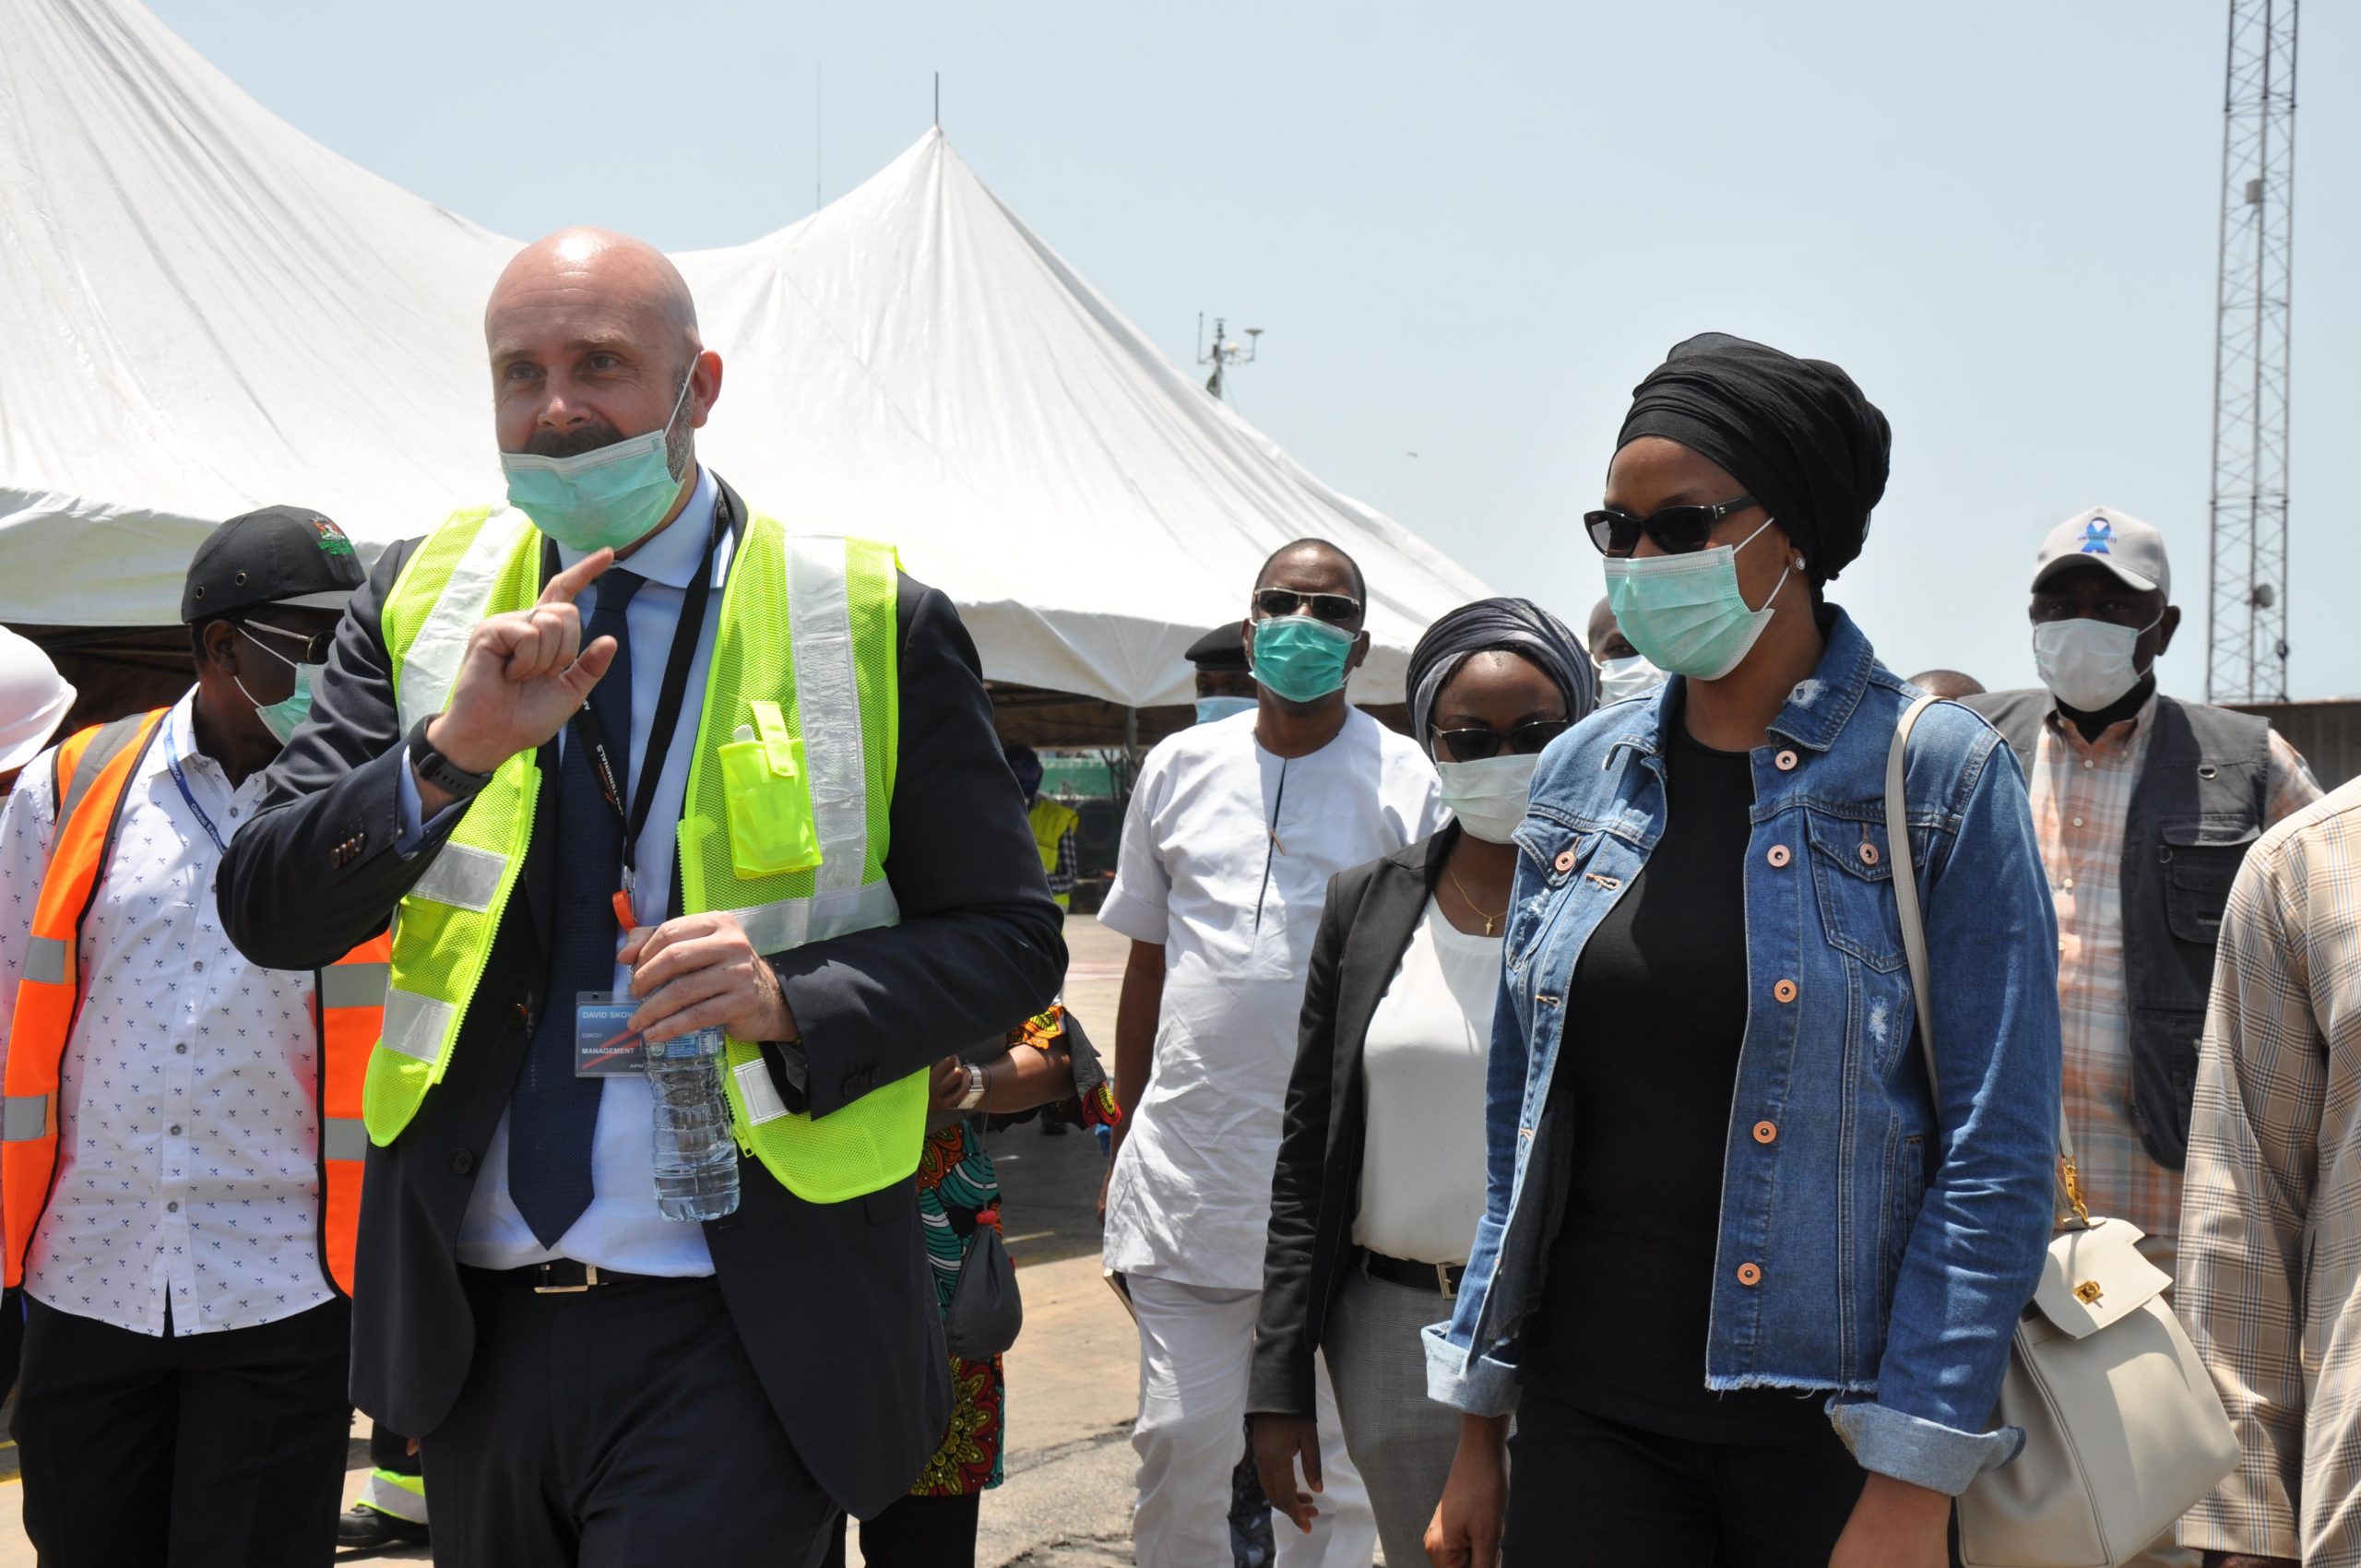 The Head of Terminals, Africa and Middle East region of APM Terminals, David Skov (left) and the Managing Director of Nigerian Ports Authority (NPA), Hadiza Bala Usman (right), at the commissioning of two new multimillion dollars state-of-the-art Mobile Harbor Cranes acquired by APM Terminals Apapa on Thursday.